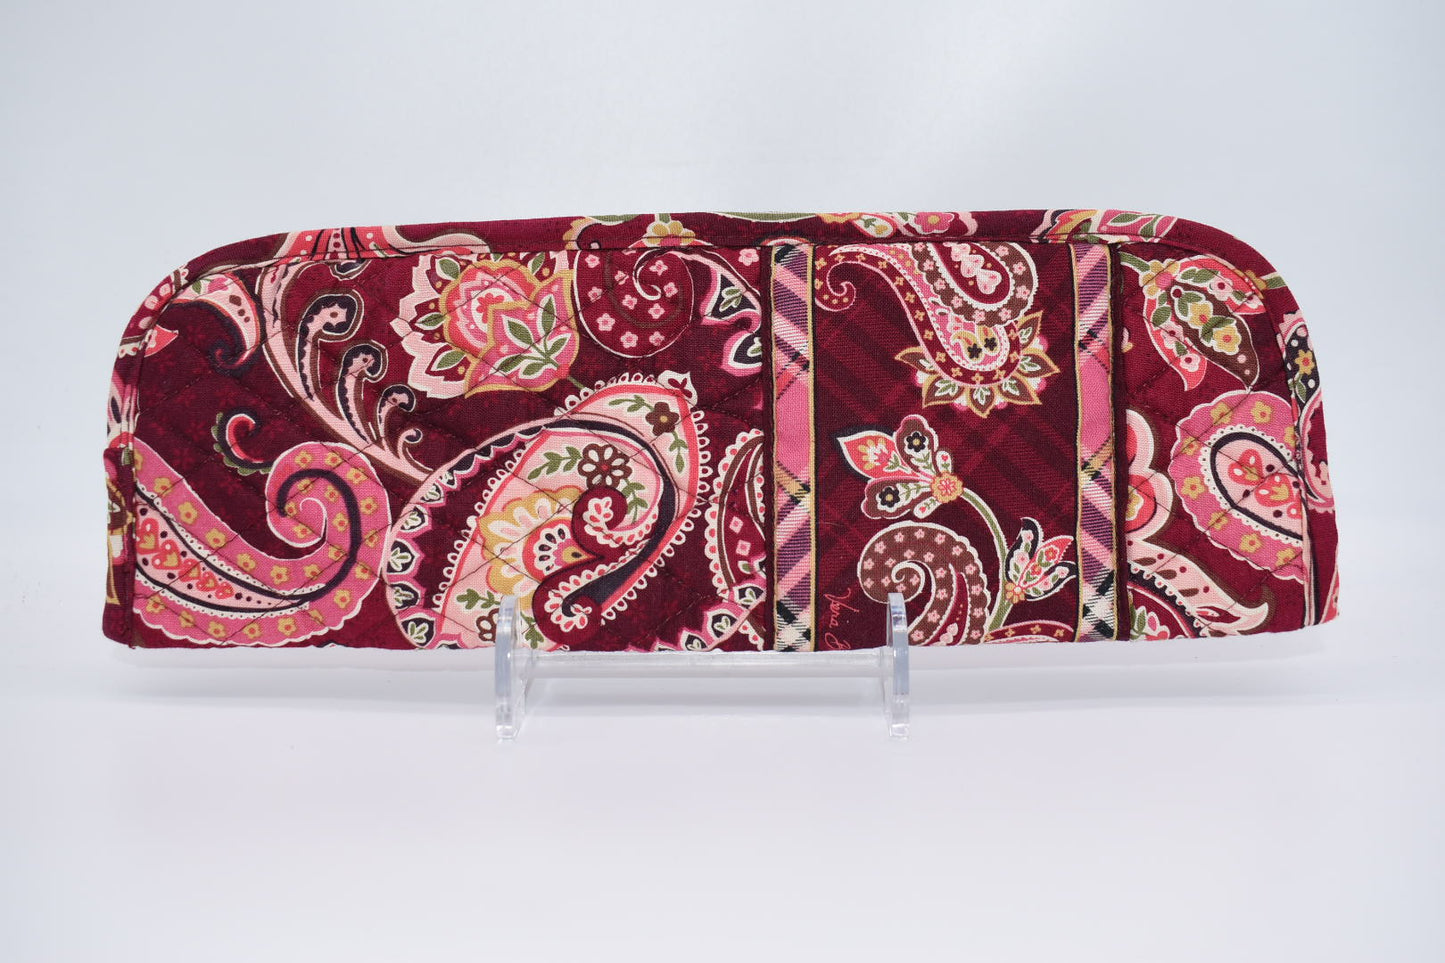 Vera Bradley Curling & Flat Iron Cover in "Piccadilly Plum" Pattern